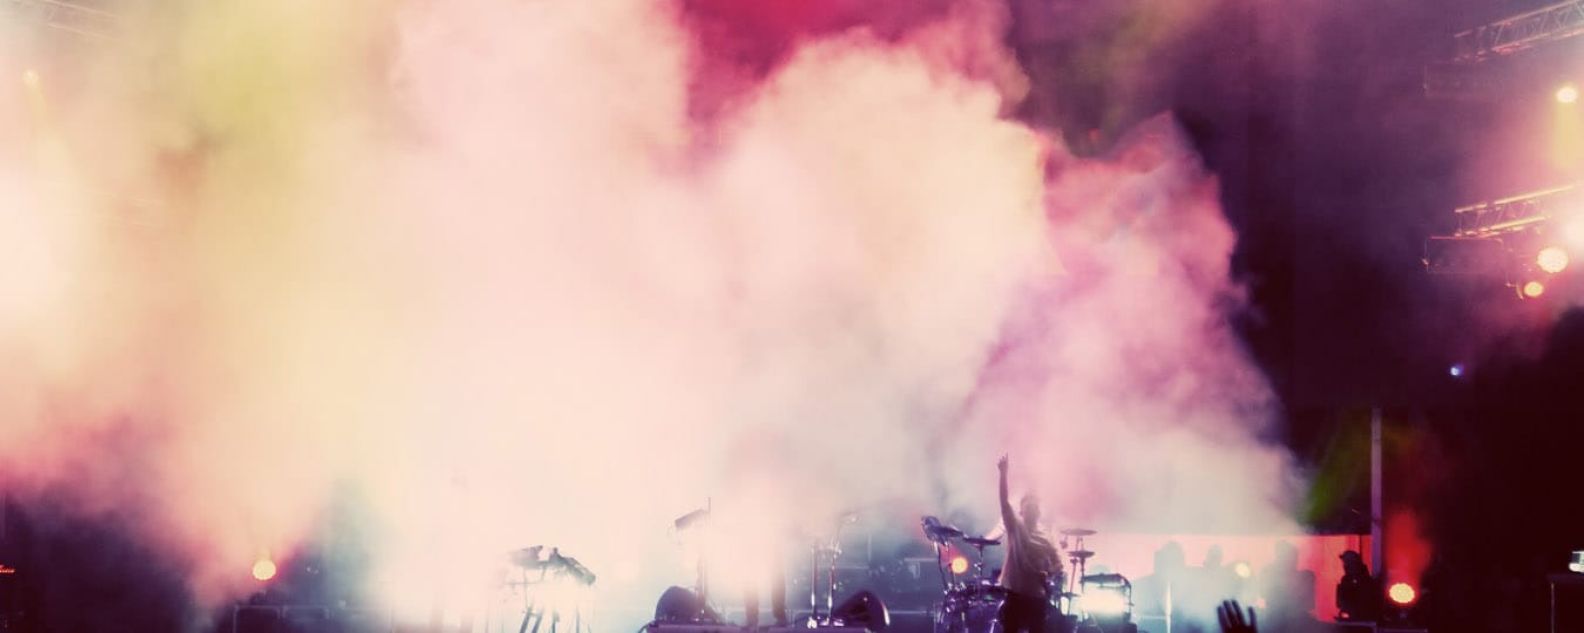 Band on stage at concert with smoke effects surrounding them